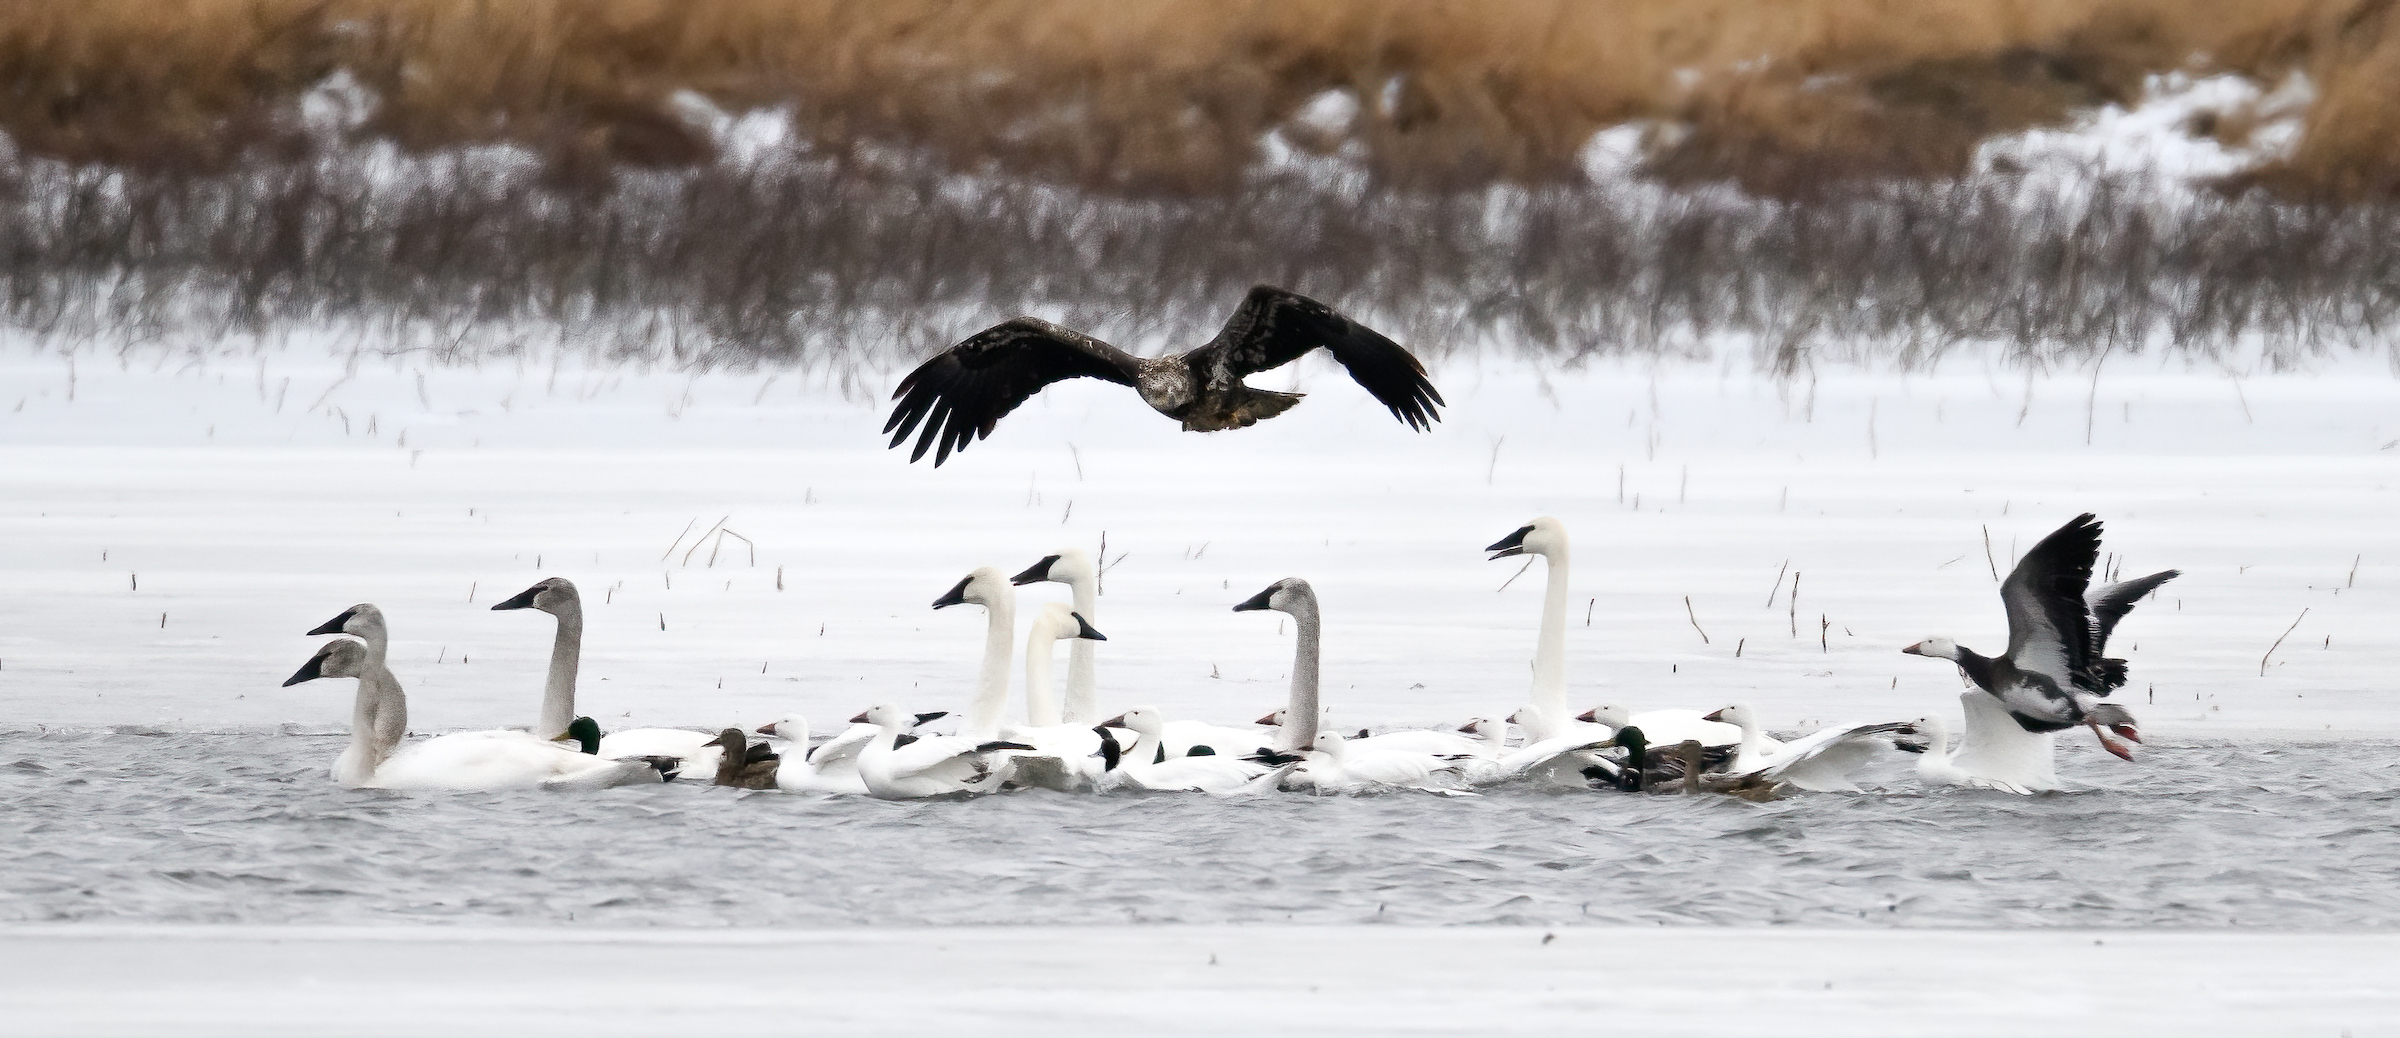 A juvenile bald eagle swoops down on trumpeter swans and other waterfowl in the Snow Goose Pond Complex at Loess Bluffs NWR (formerly known as Squaw Creek). Loess Bluffs  is a wildlife refuge managed by the U.S. Fish and Wildlife Service. The 700-acre refuge, located in northwest Missouri is known for the migrating waterfowl, particularly Snow Geese. Fall and Spring migration can bring millions of Snow Geese to the refuge. Also, bald eagles and an occasional golden eagle pass through the area during the fall and winter months. 

The 10-mile auto tour around the waterways and marshes of the refuge is an excellent way to spot birds of prey, waterfowl, beavers, otters, and muskrats.